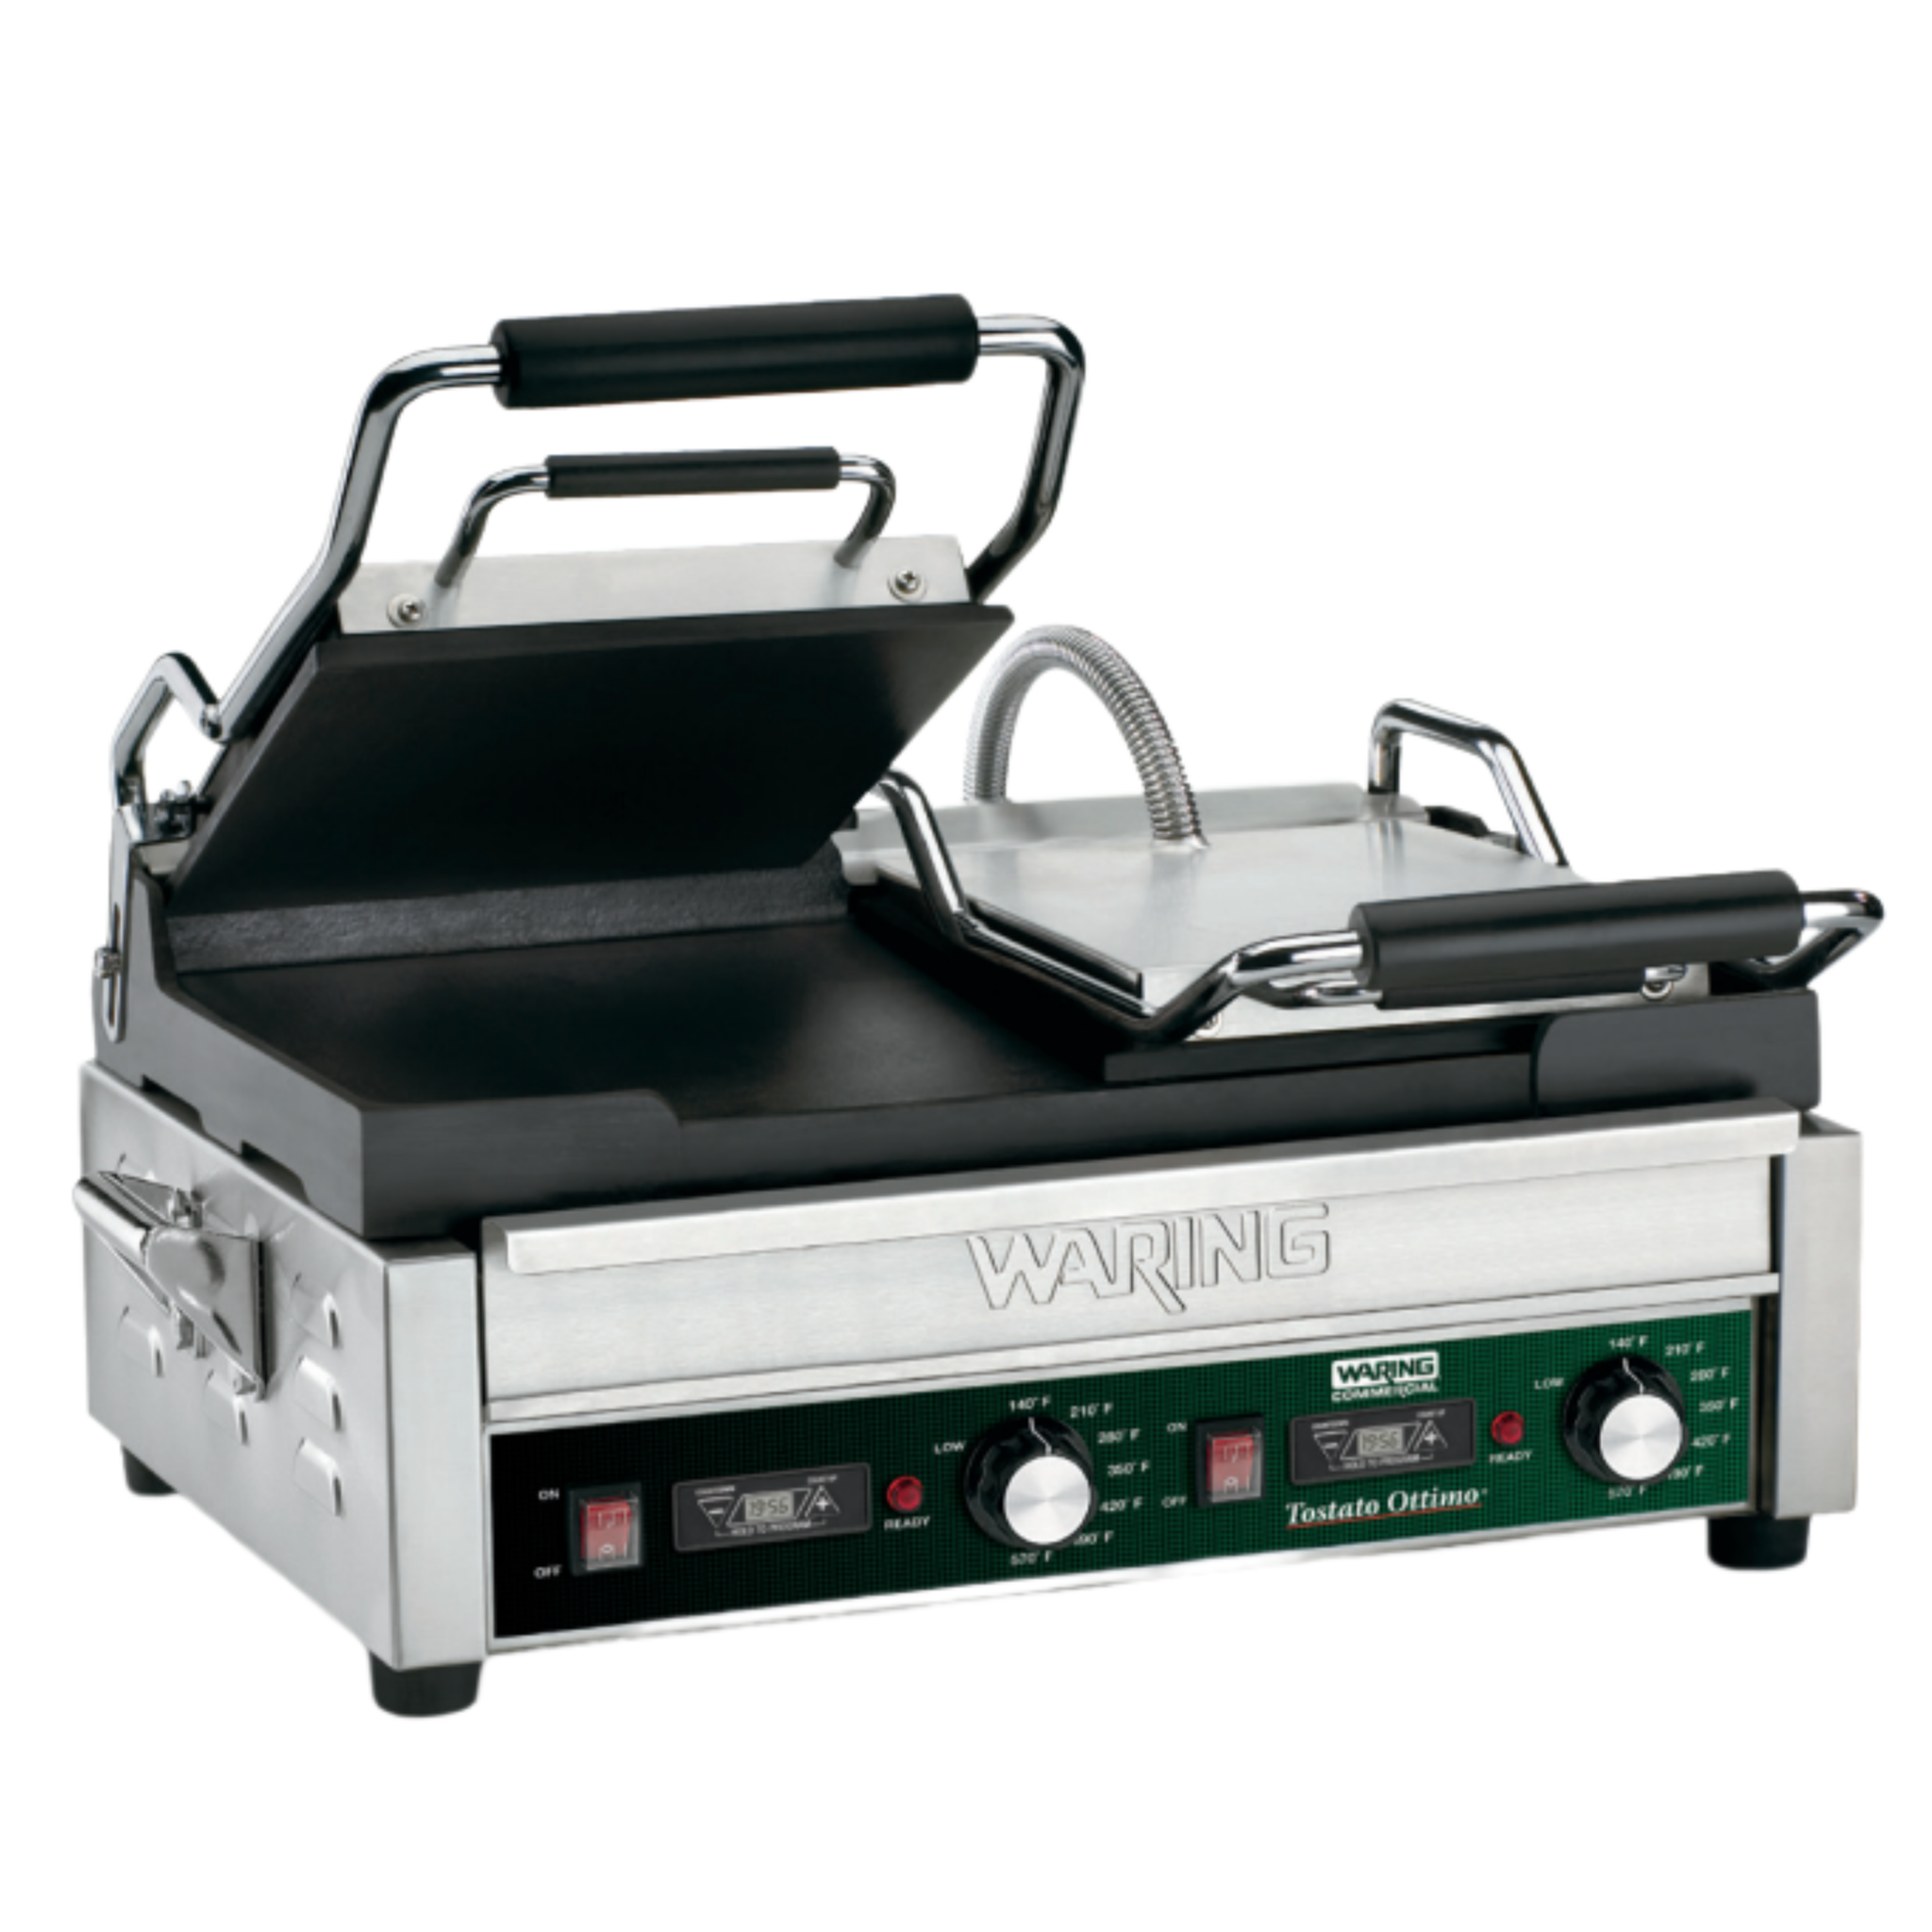 WFG300 Tostato Ottimo - Dual Flat Toasting Grill by Waring Commercial